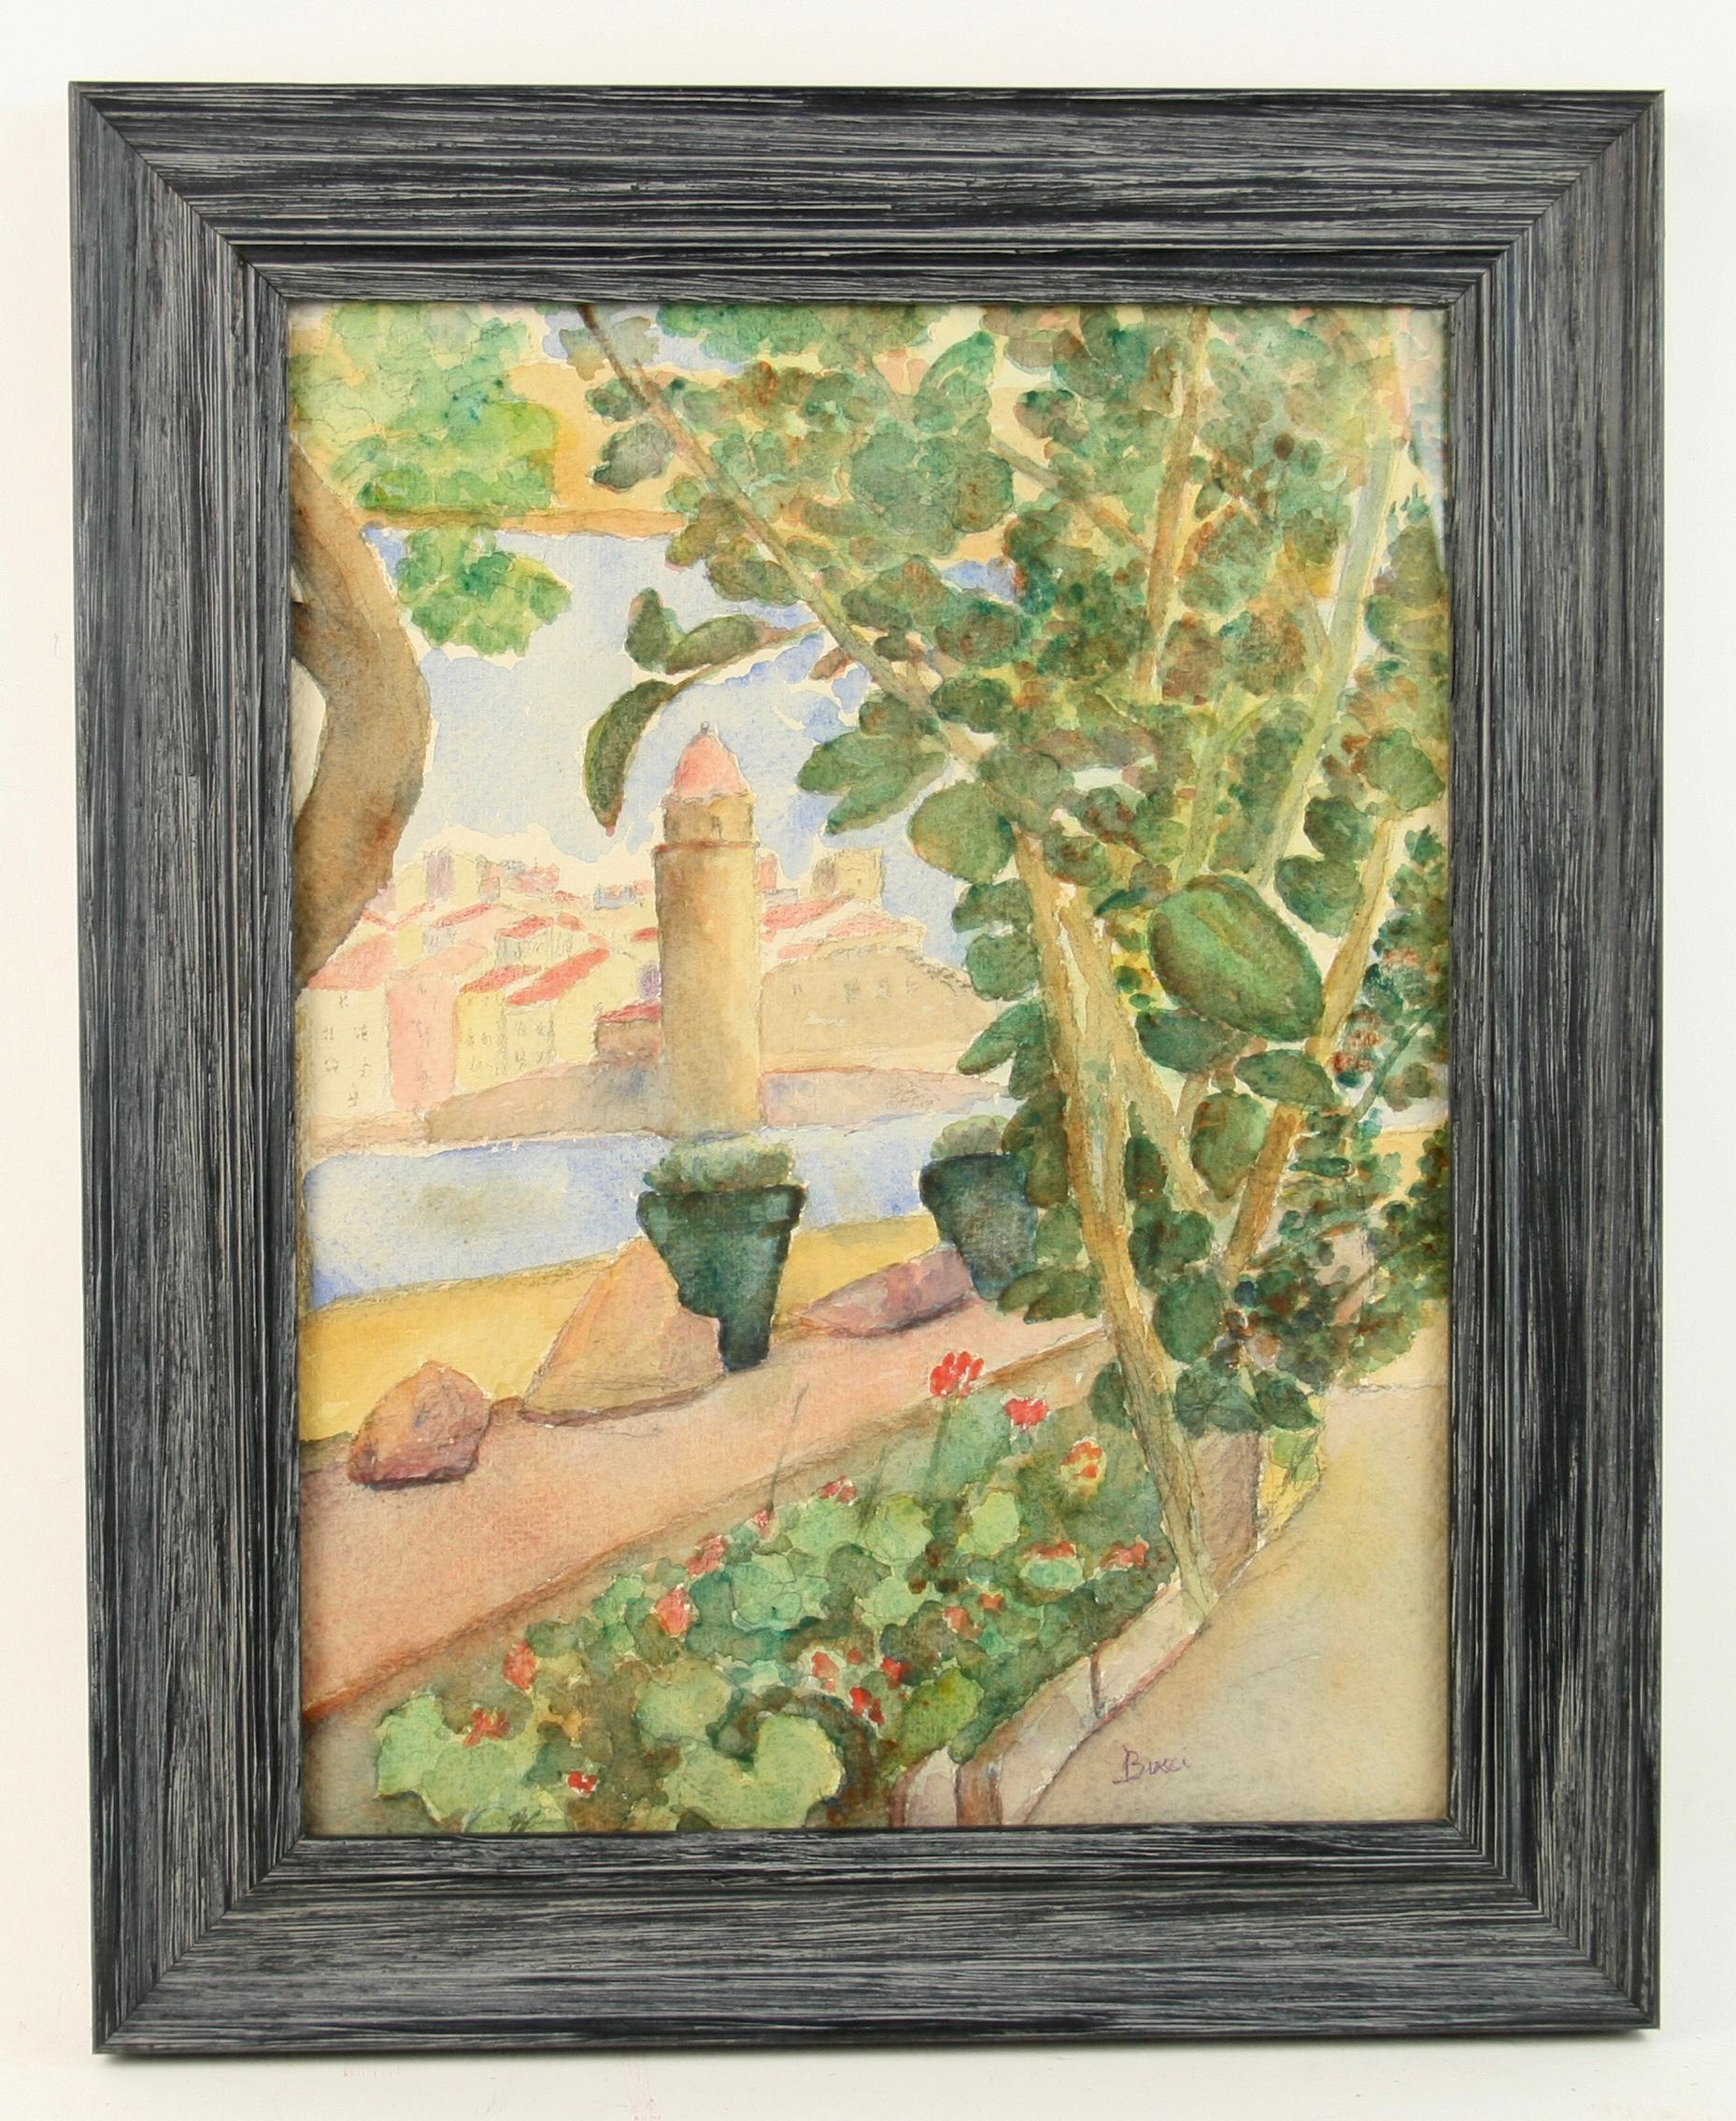 #5-3486 Mediterranean Landscape ,vintage watercolor on paper, signed by Bucci displayed in a new -wood frame under glass.Image size 12.5 H x 9.5 W